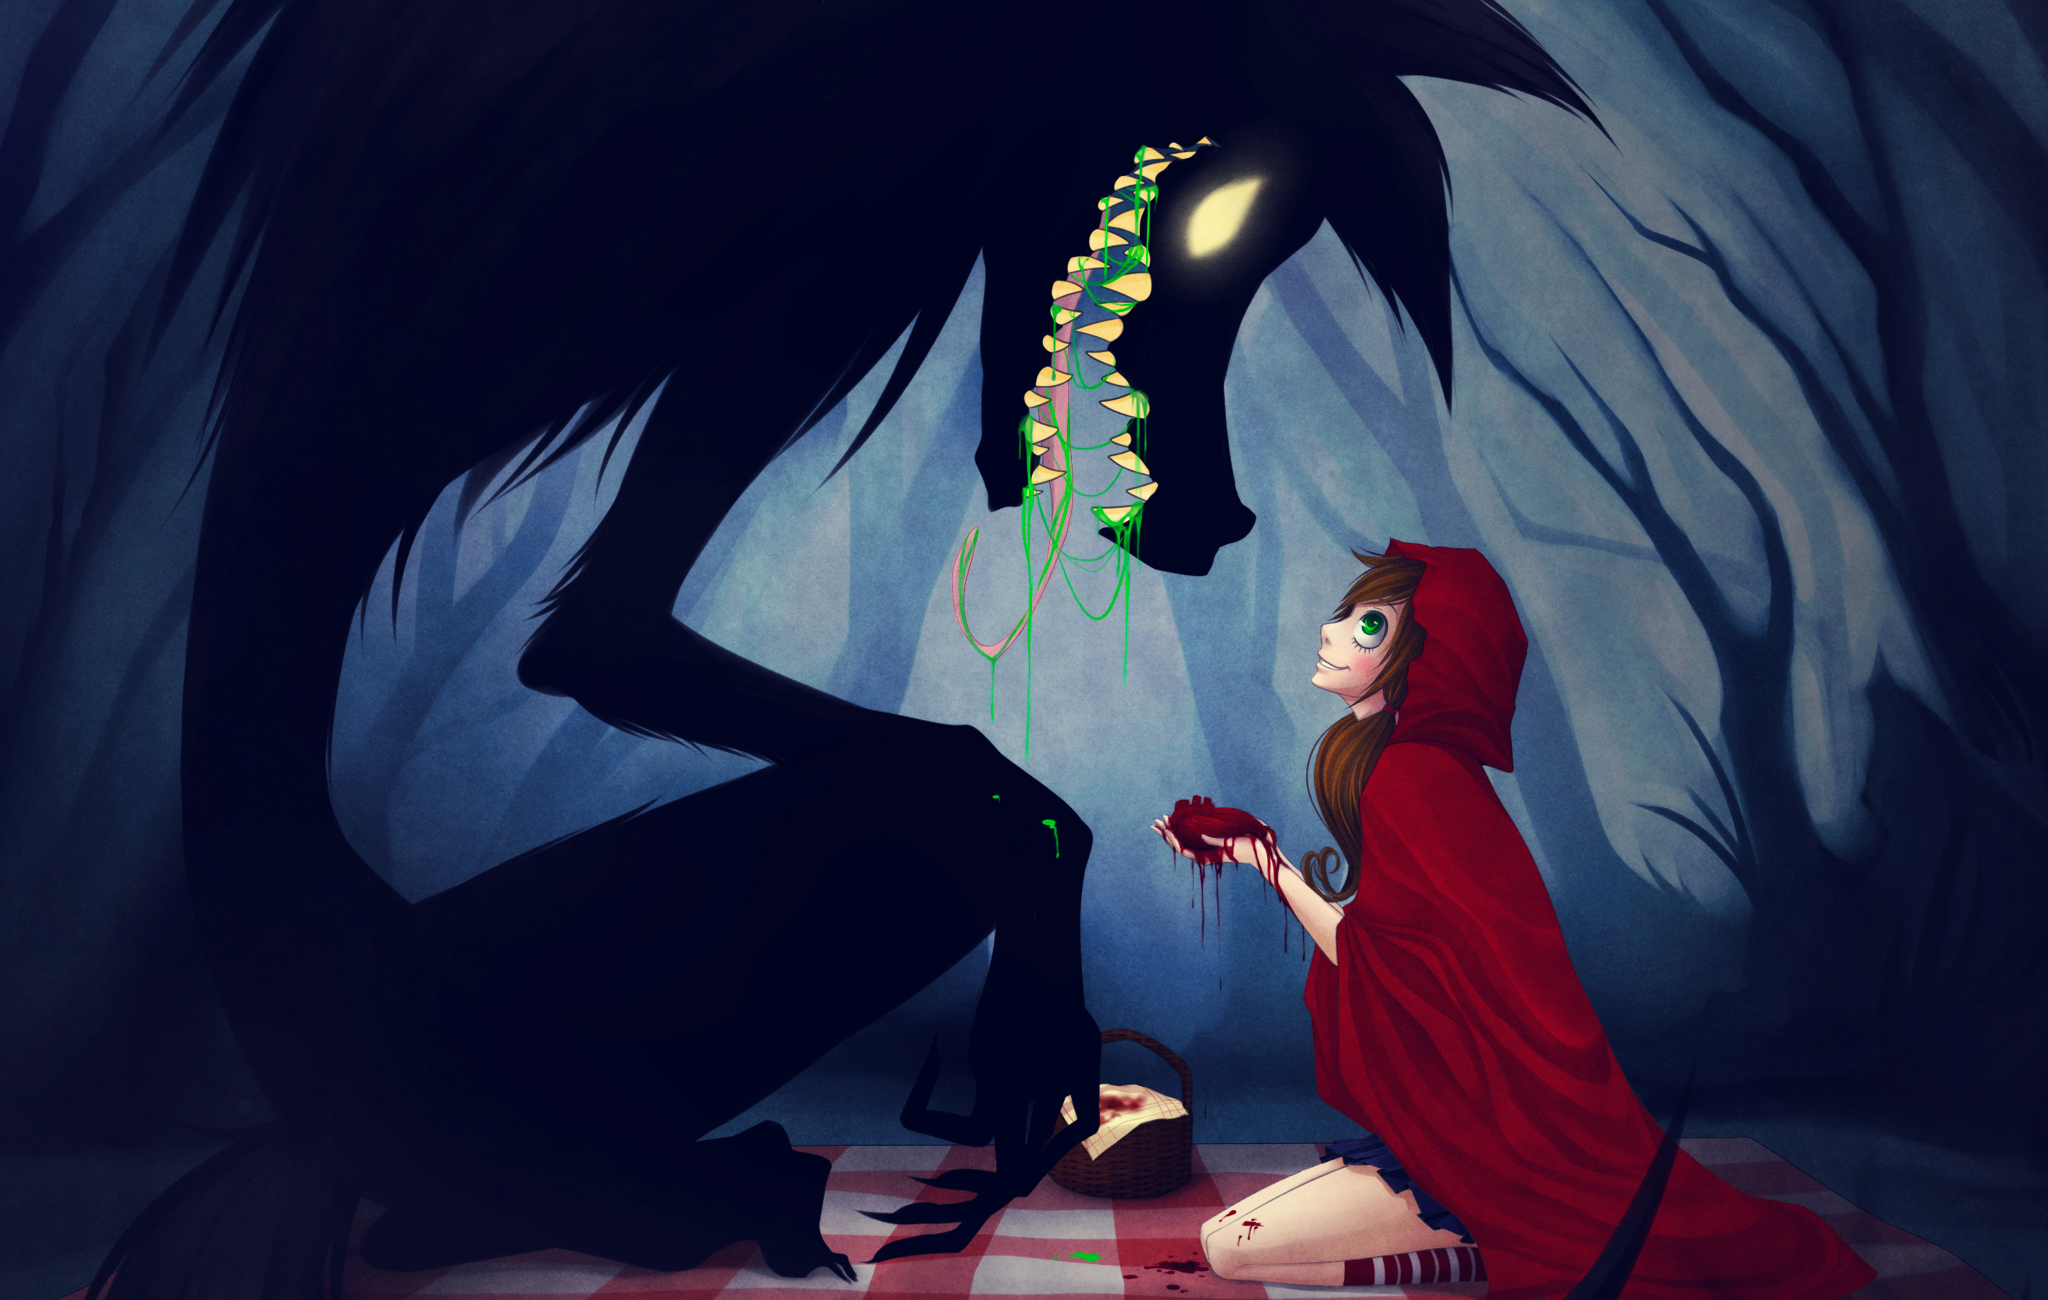 Free download Gallery For gt Little Red Riding Hood And The Wolf Anime ...